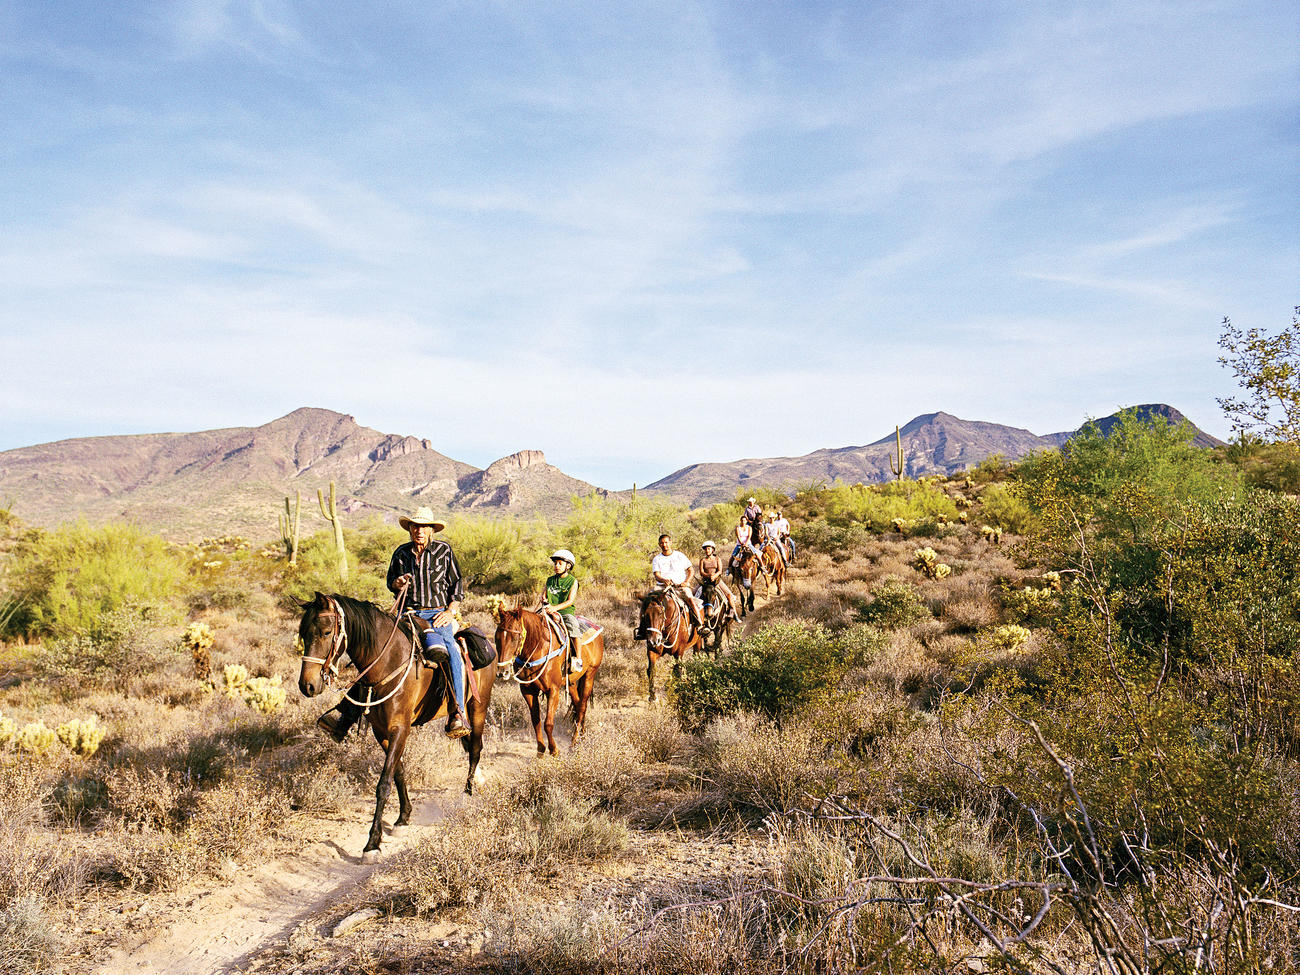 Get a taste of the old West in Cave Creek